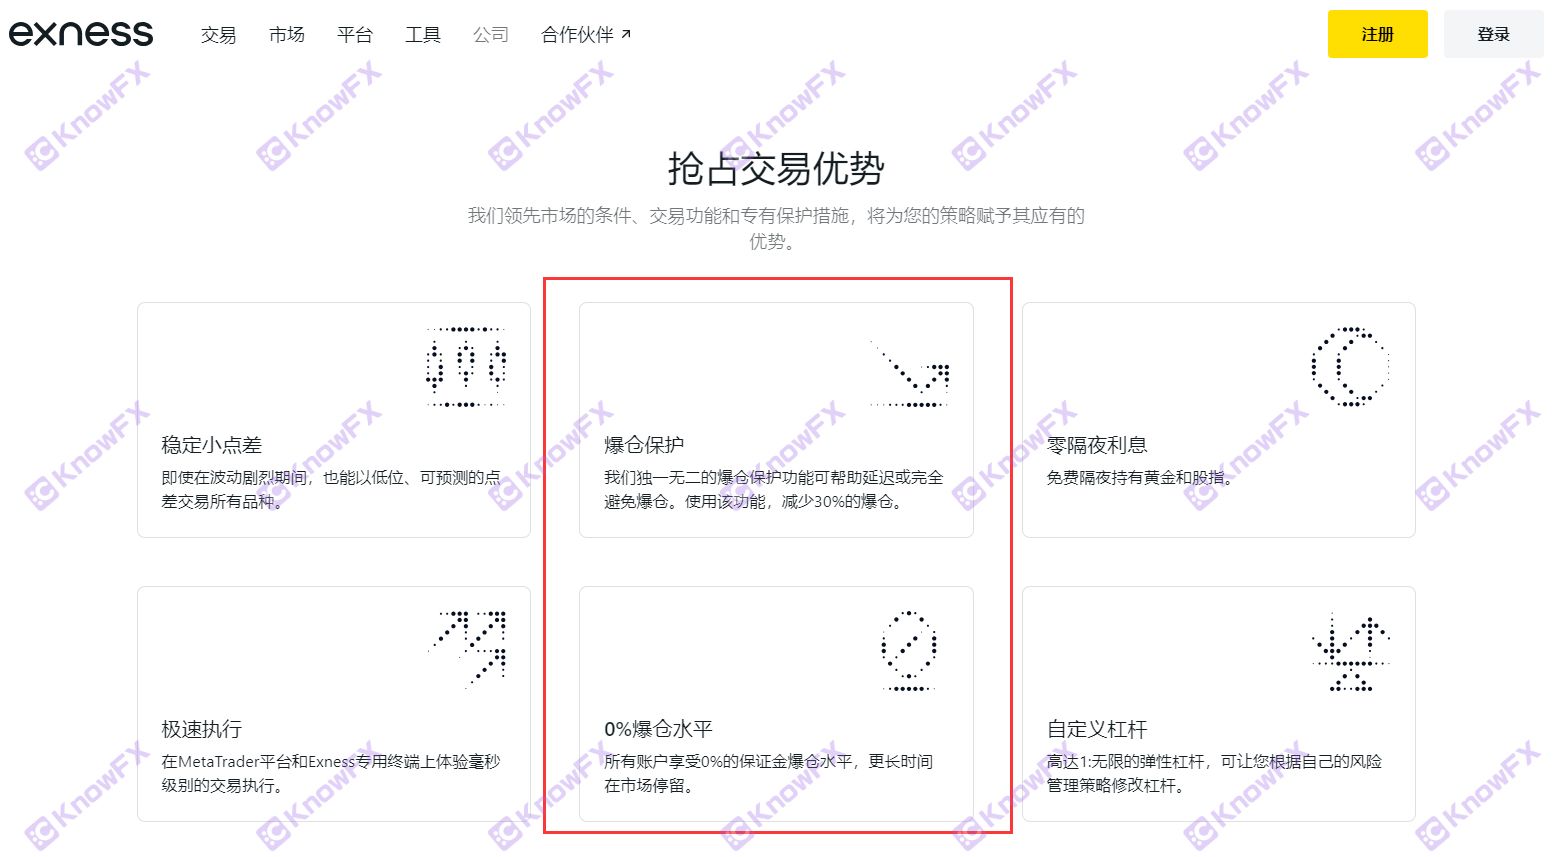 Black platform EXNESS wants to set up regulations to avoid supervision!The so -called "security platform" explosion -proof 0%?In fact, investor data is in control!-第4张图片-要懂汇圈网